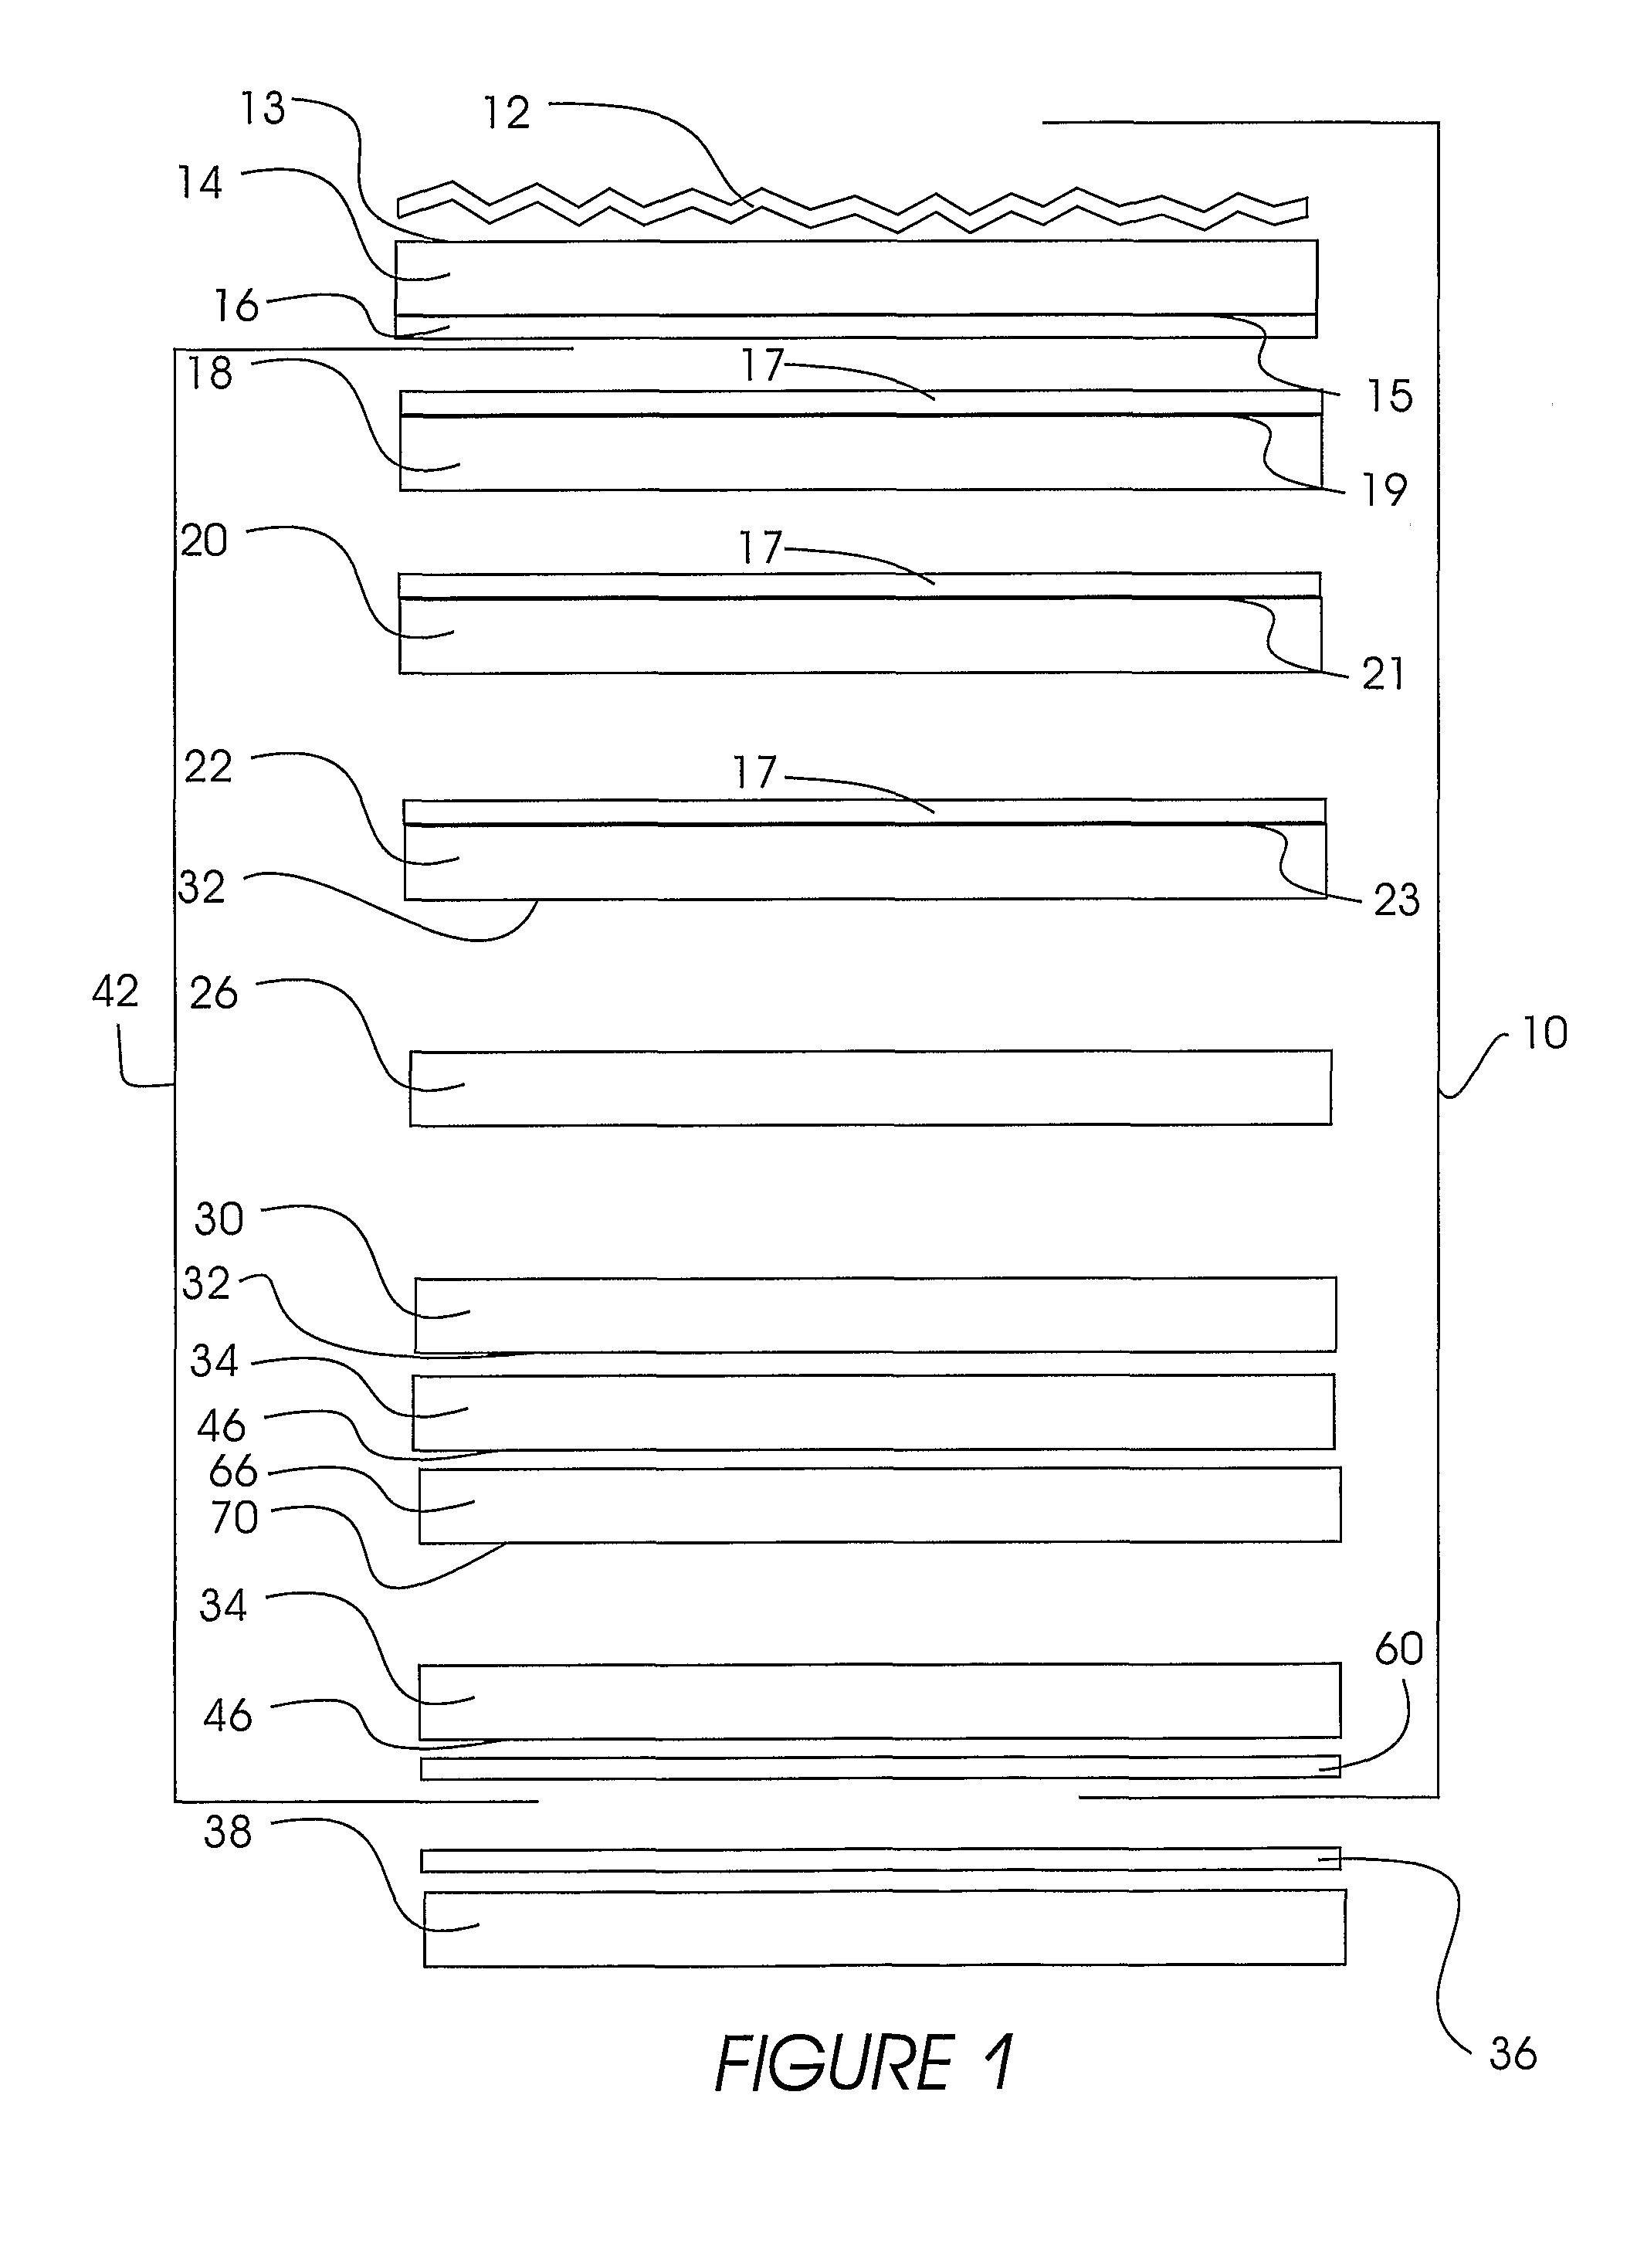 Composition of a weatherable roofing composite product